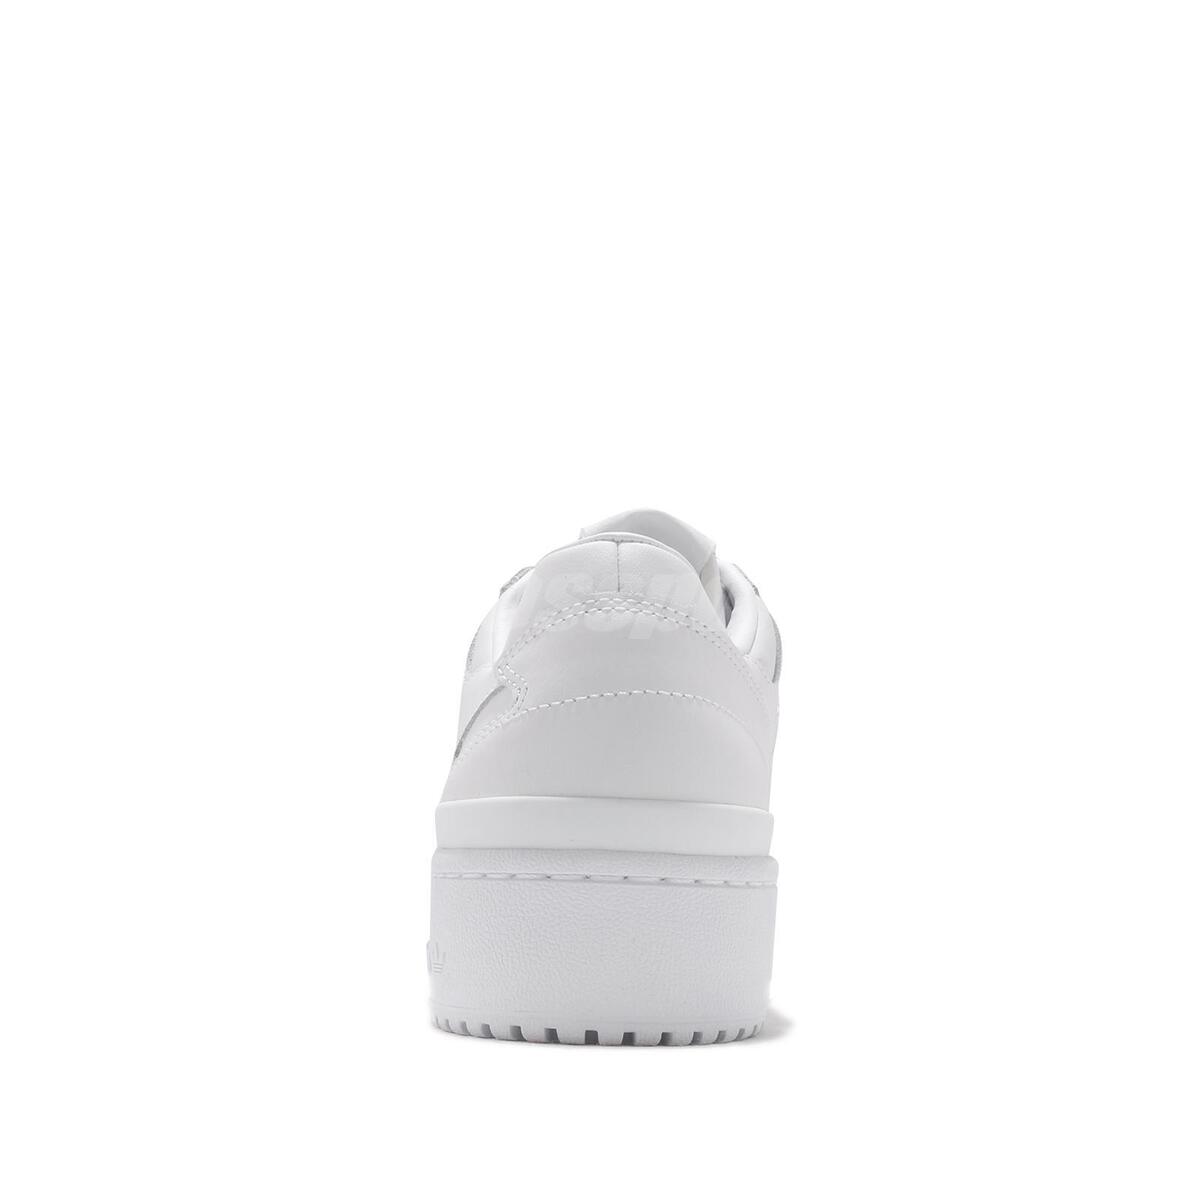 adidas originals forum bold trainers in white with neutral tones